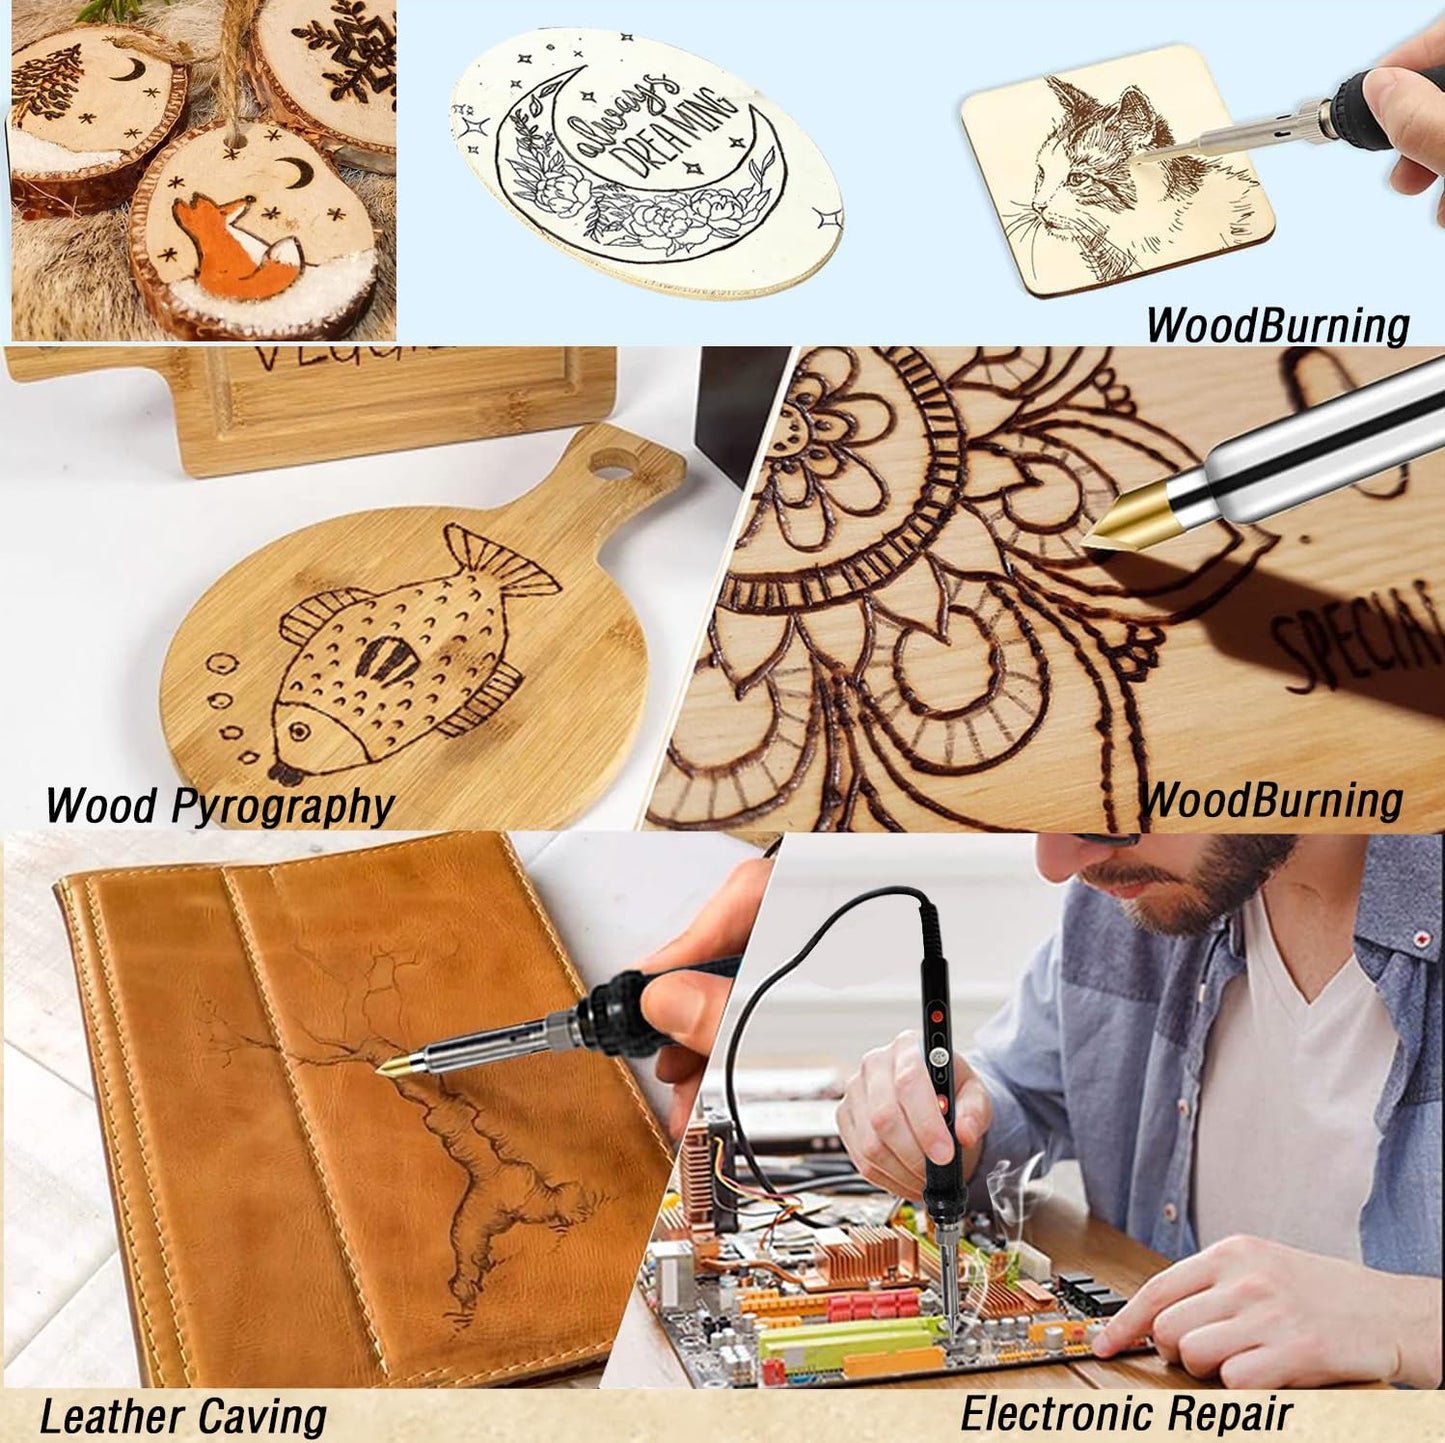 Wood Burning Kit,Wood Burning Tool with Adjustable Temperature 200~450°C, Professional Wood Burning Pen for Embossing Carving DIY Adults Crafts Beginners